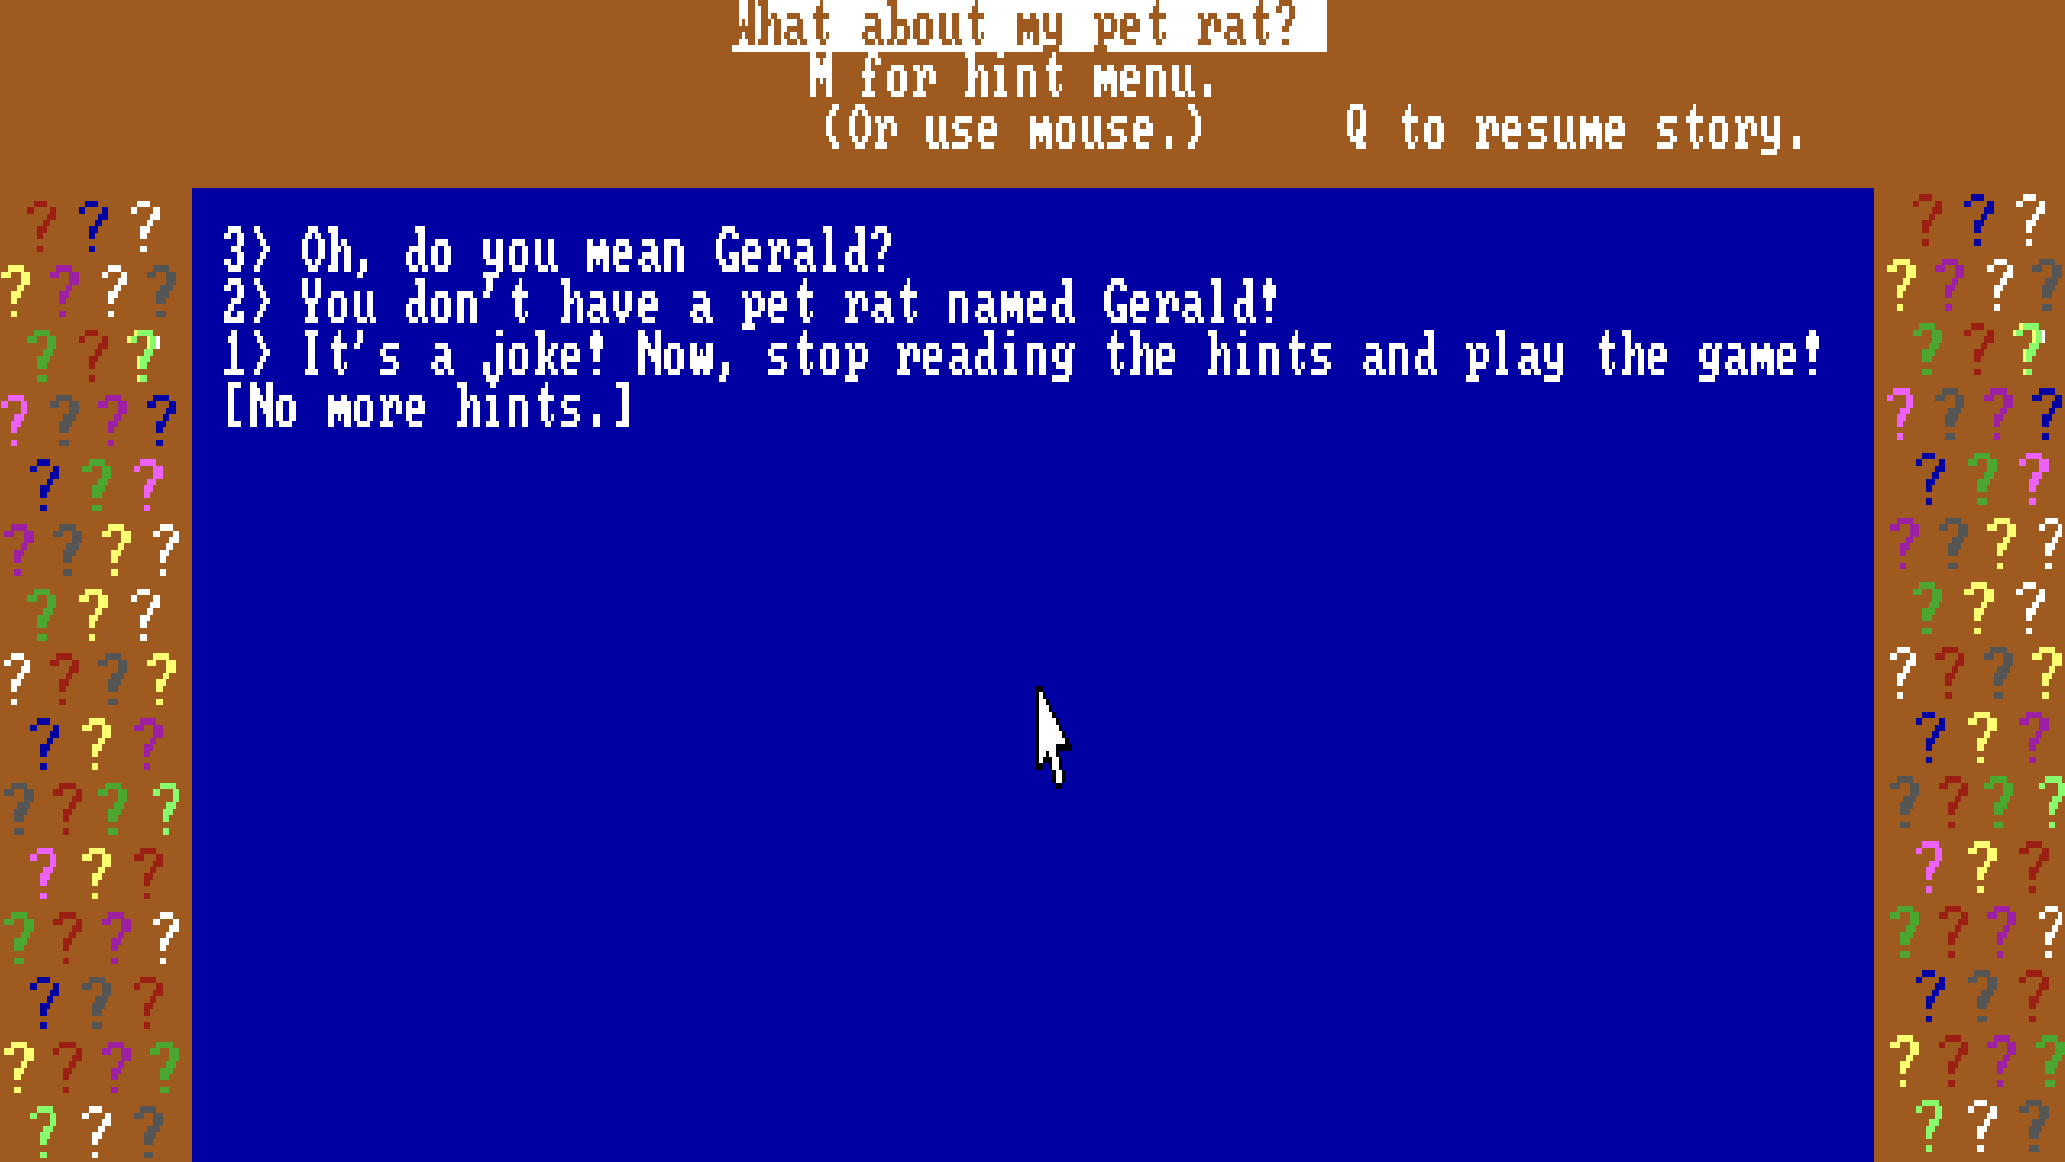 A hint screen in Infocom's Shogun, mocking the player for asking about their pet rat.